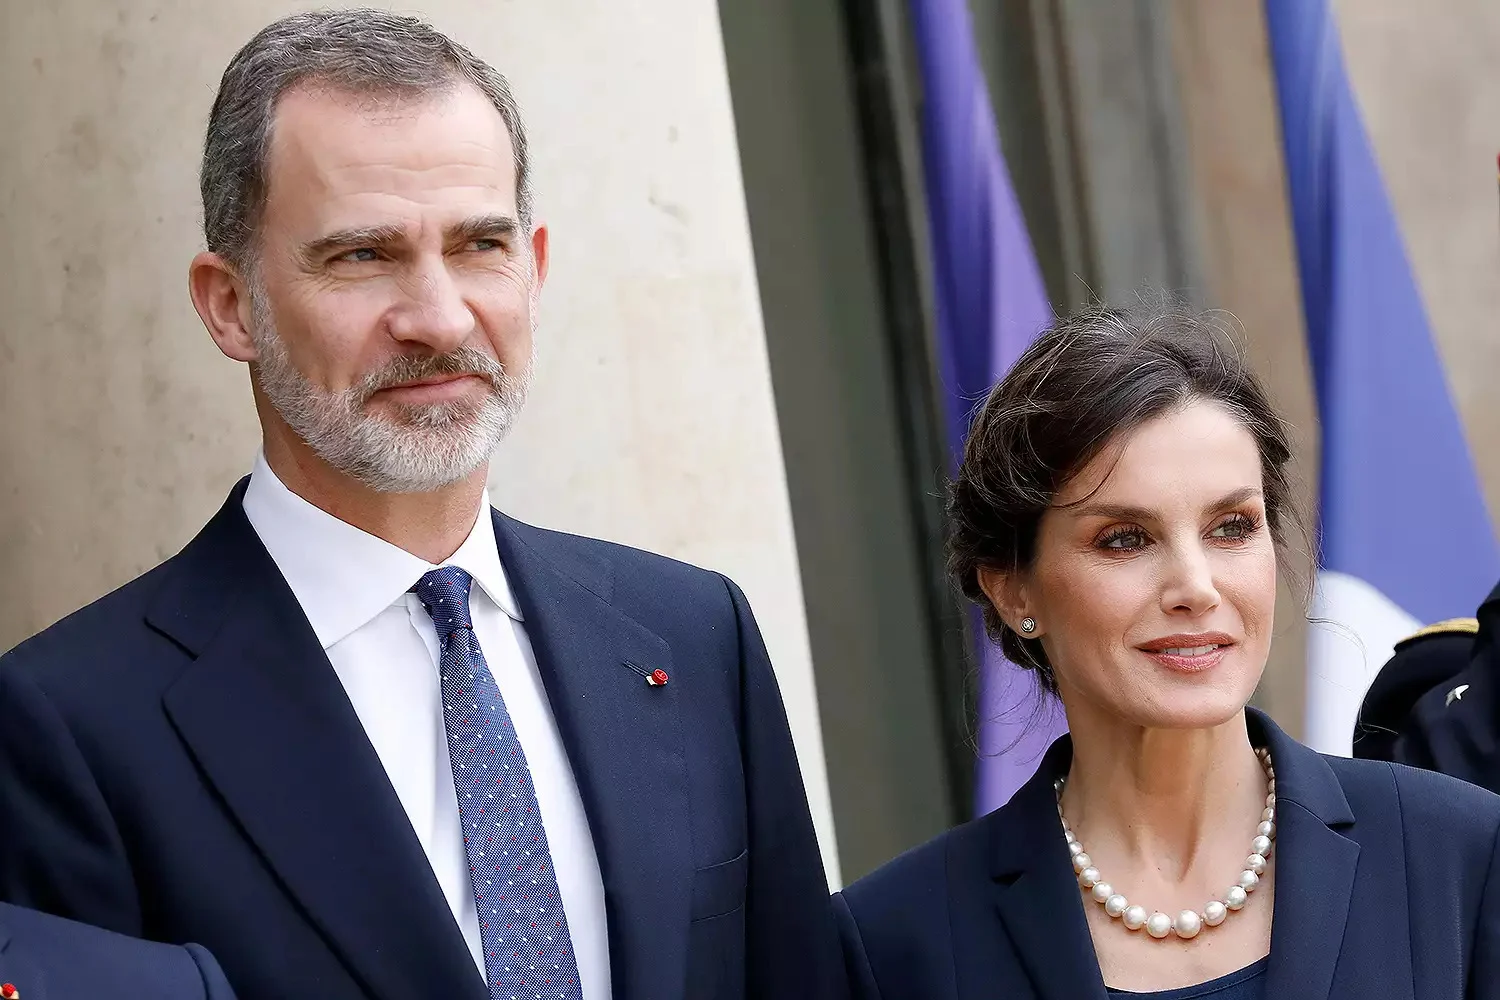 Port Harcourt Stampede Incident : King, Queen Of Spain Sympathize With Buhari